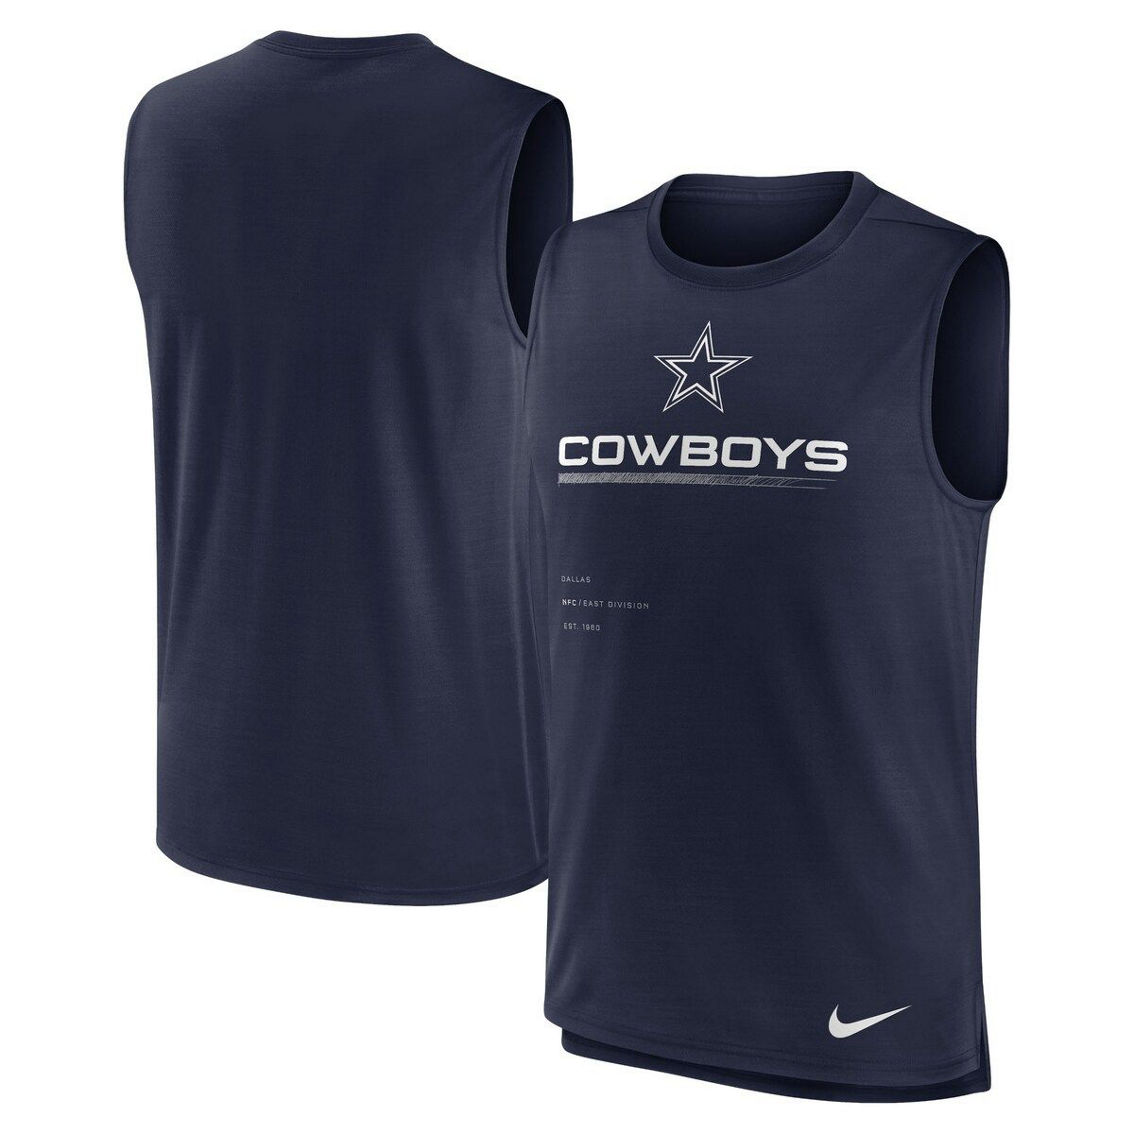 Nike Men's Navy Dallas Cowboys Muscle Trainer Tank Top - Image 2 of 4